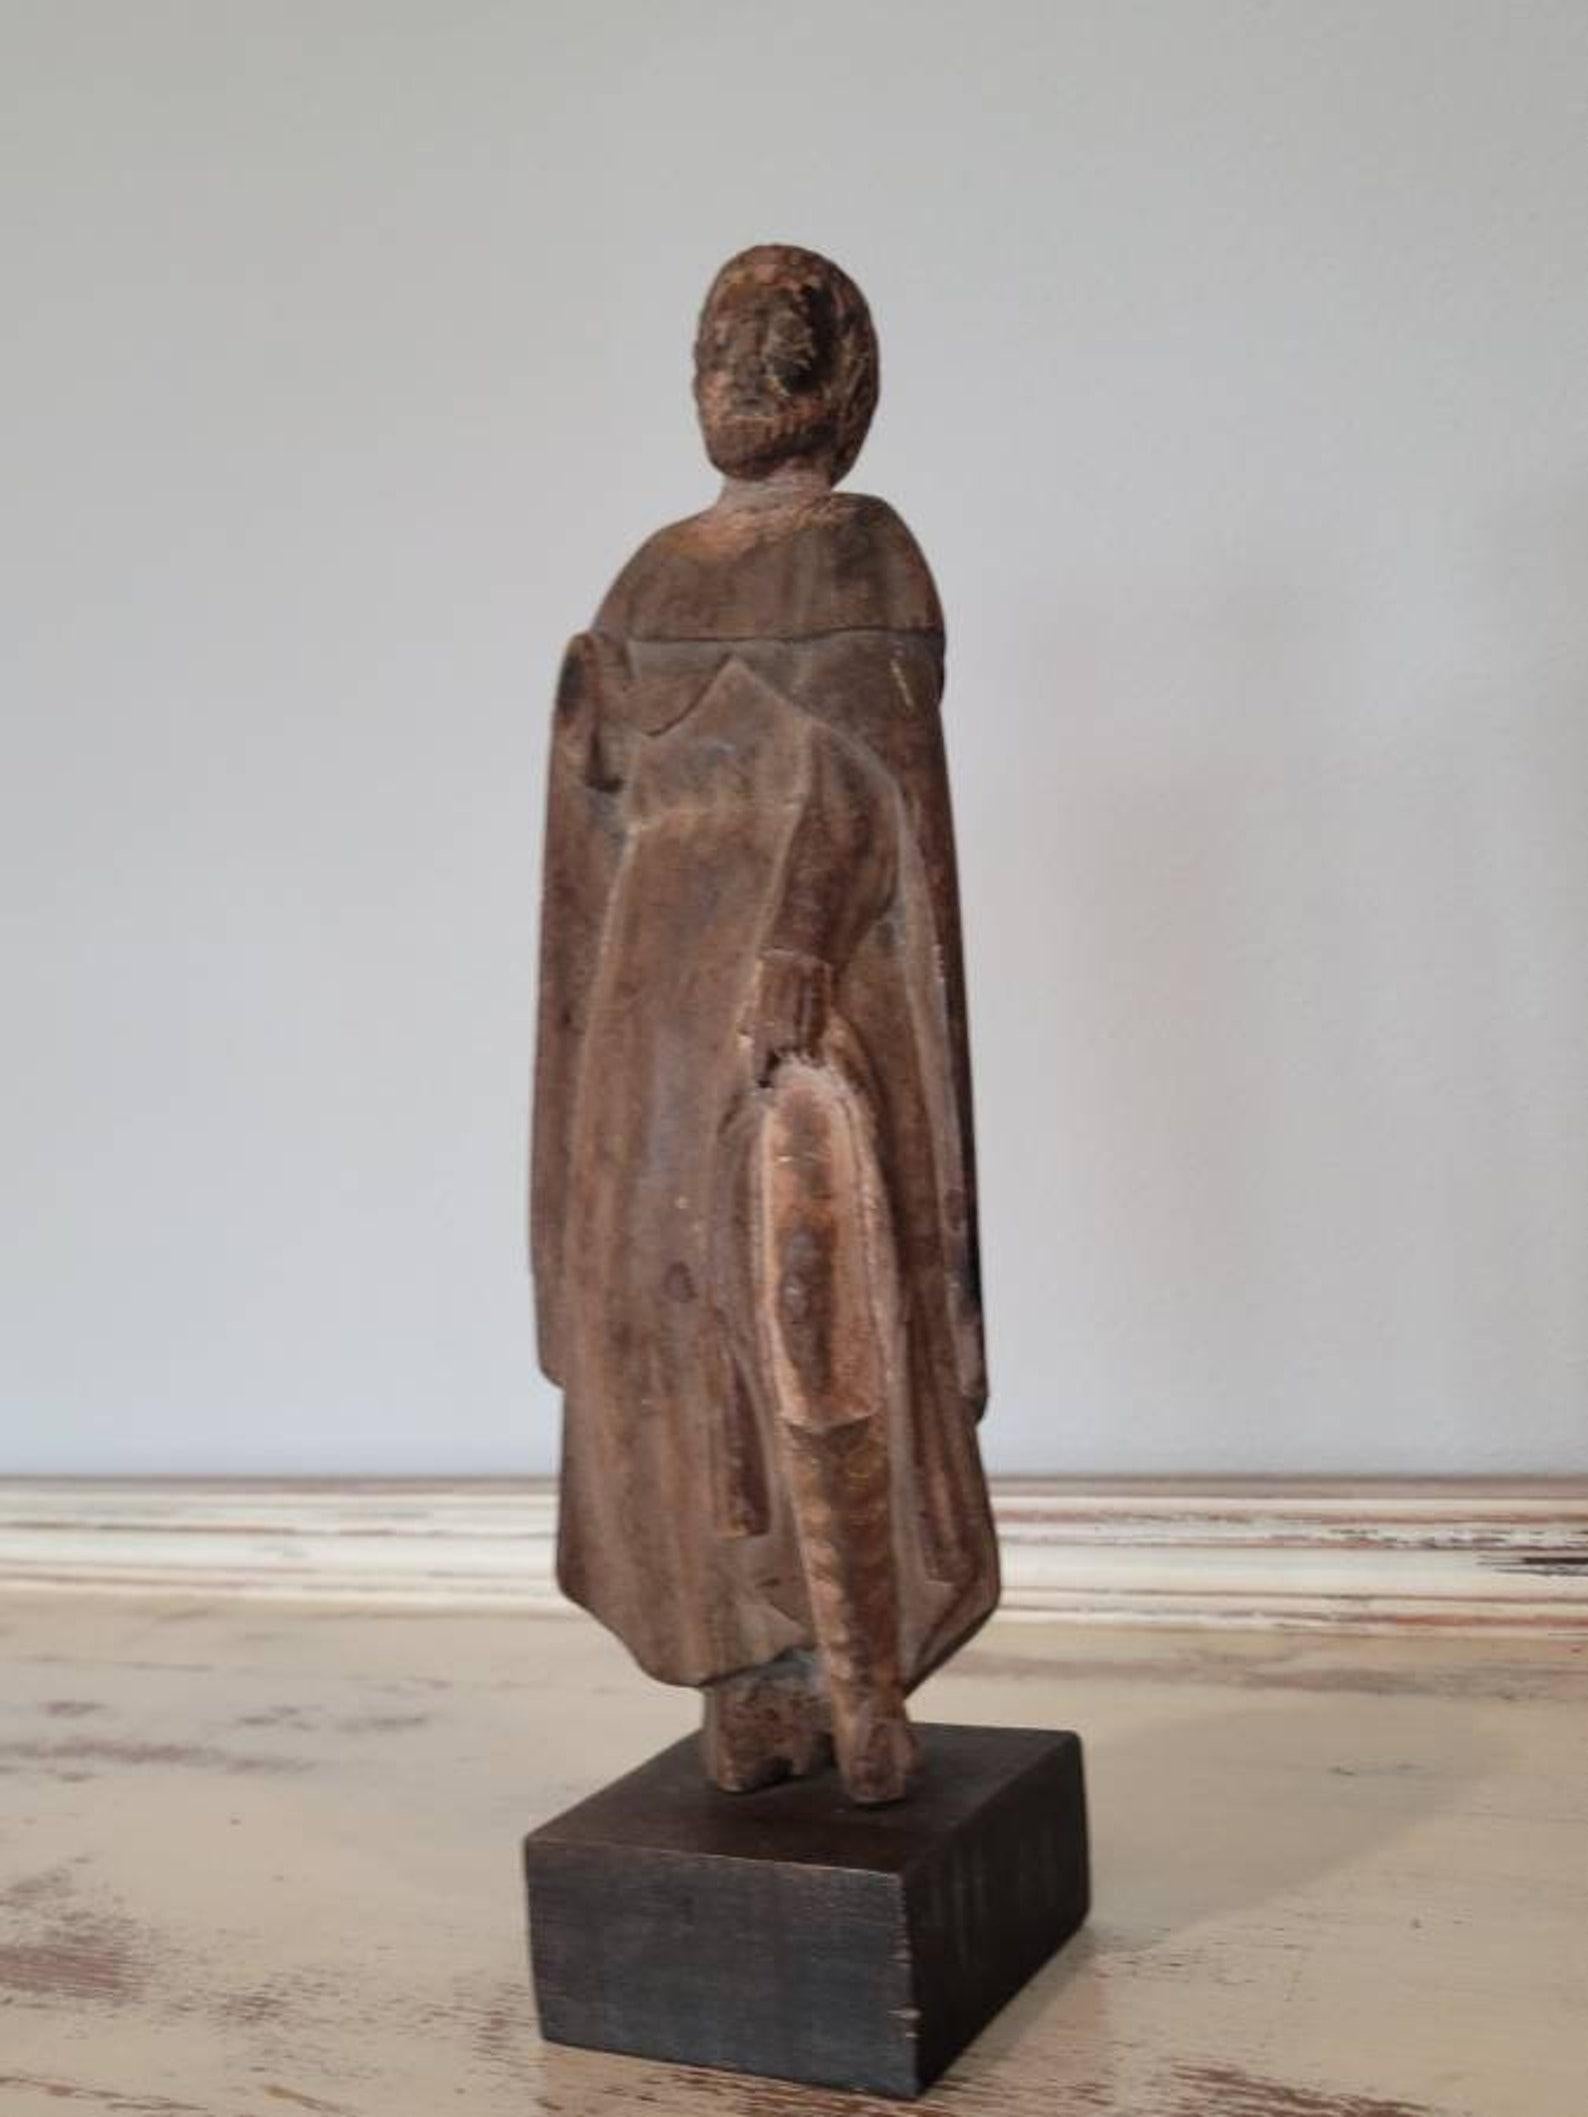 A scarce 17th century Spanish Colonial carved wood santo with provenance from the National Museum of the Philippines Manila.
circa late 1600s

A large part of what makes this example so very rare is not just the age and condition, but the saint